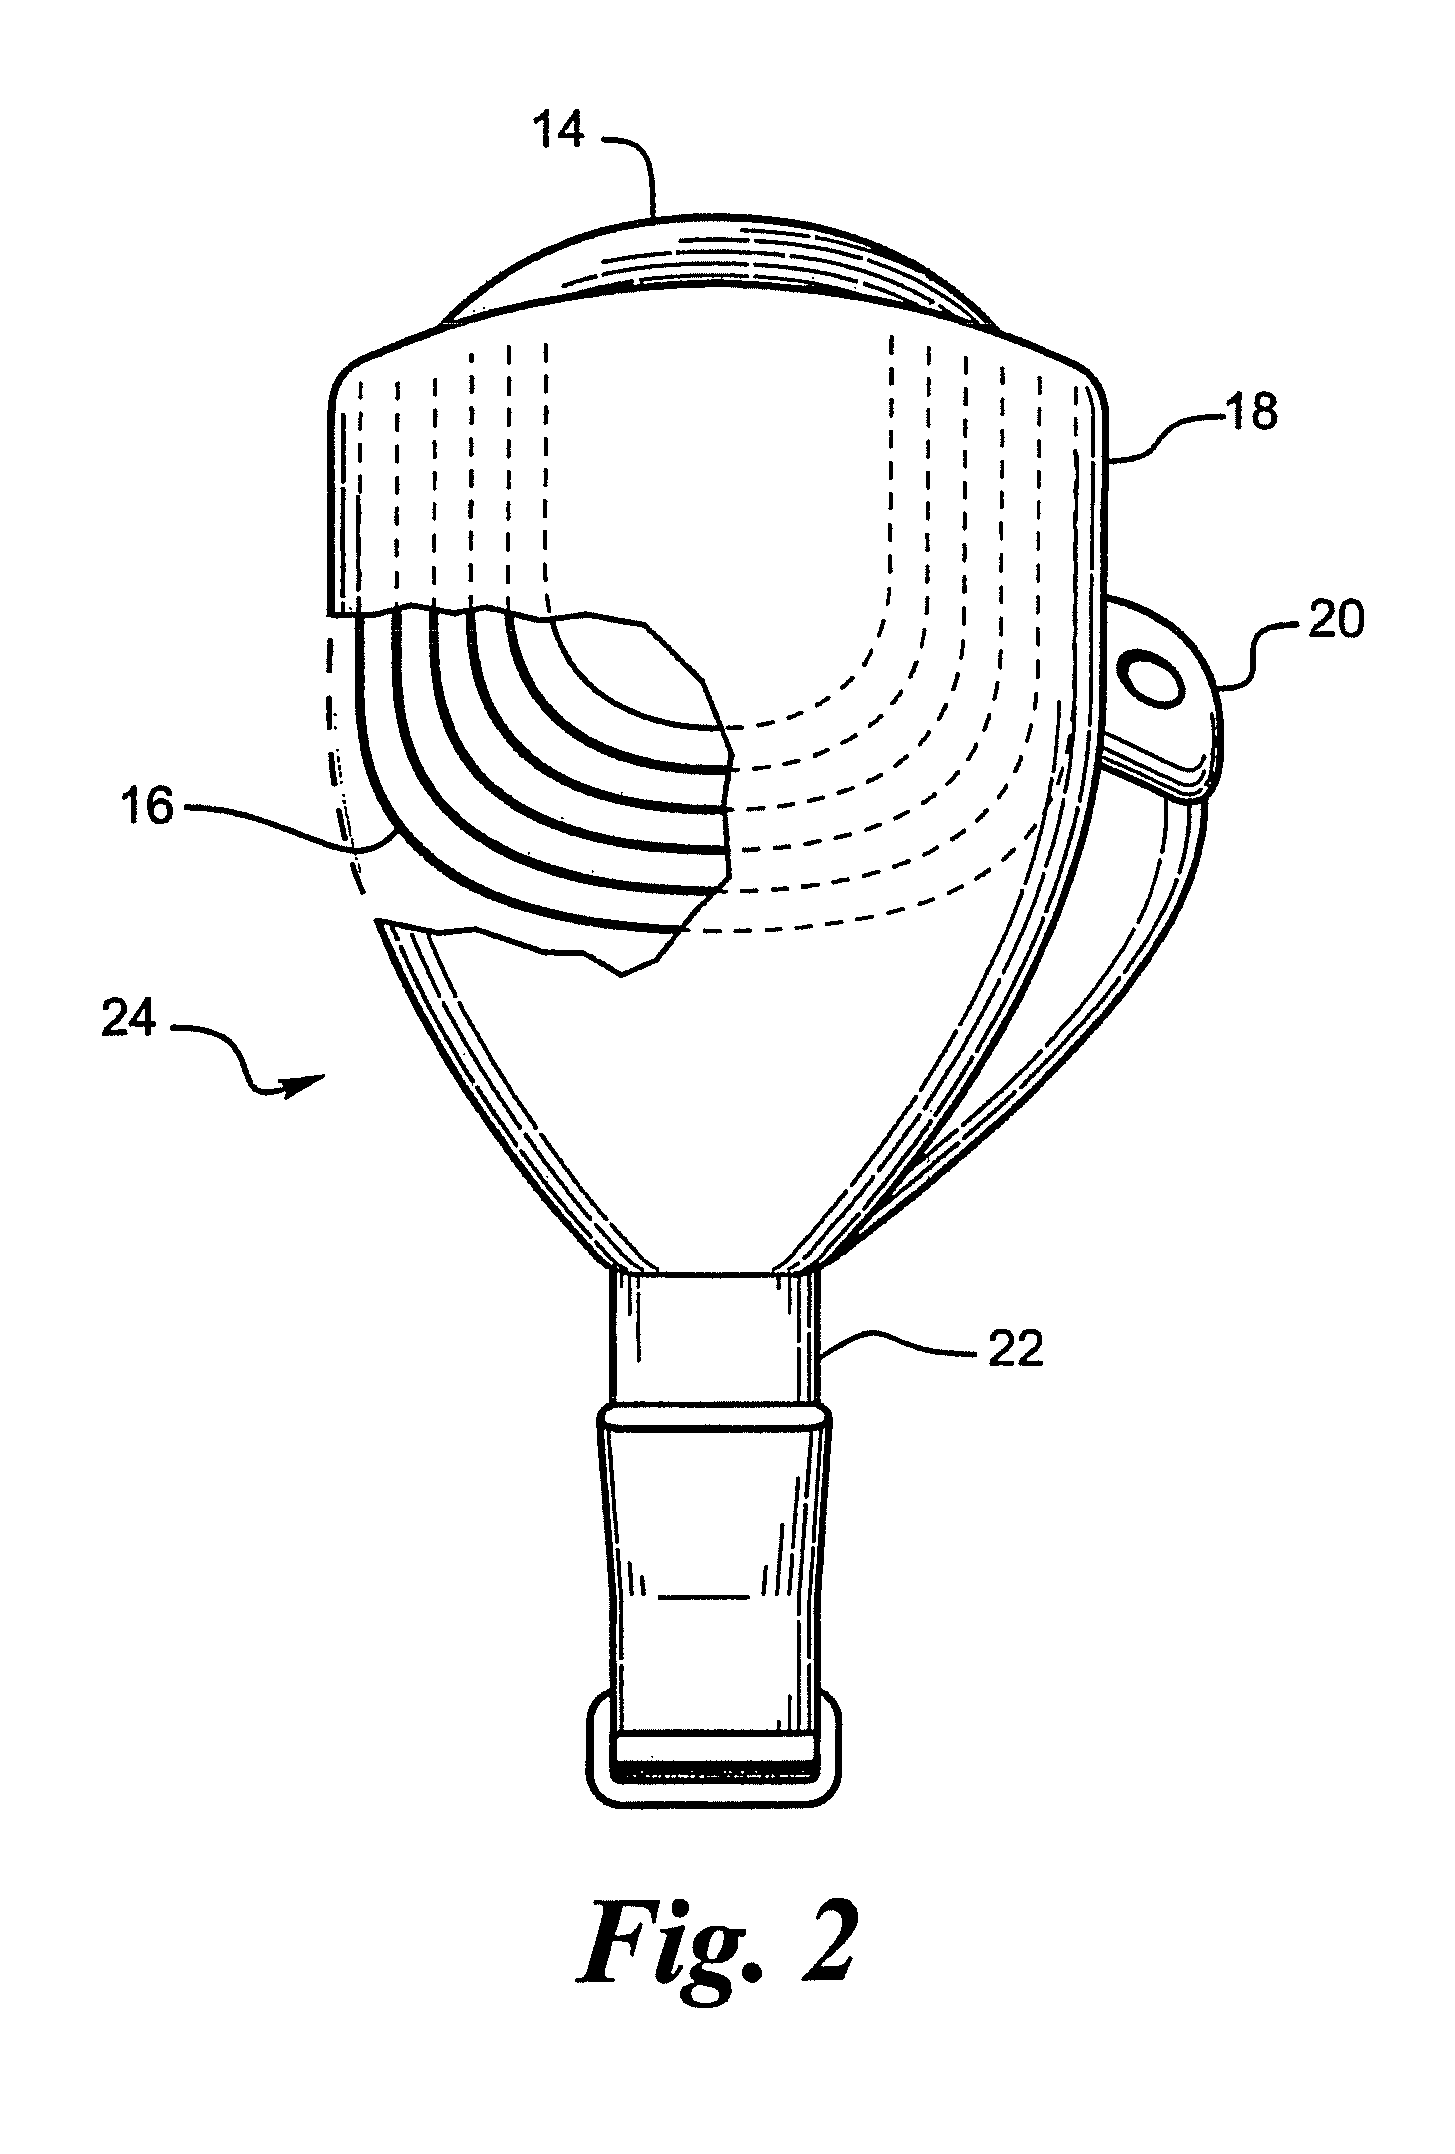 Method of manufacturing a flexible circuit electrode array